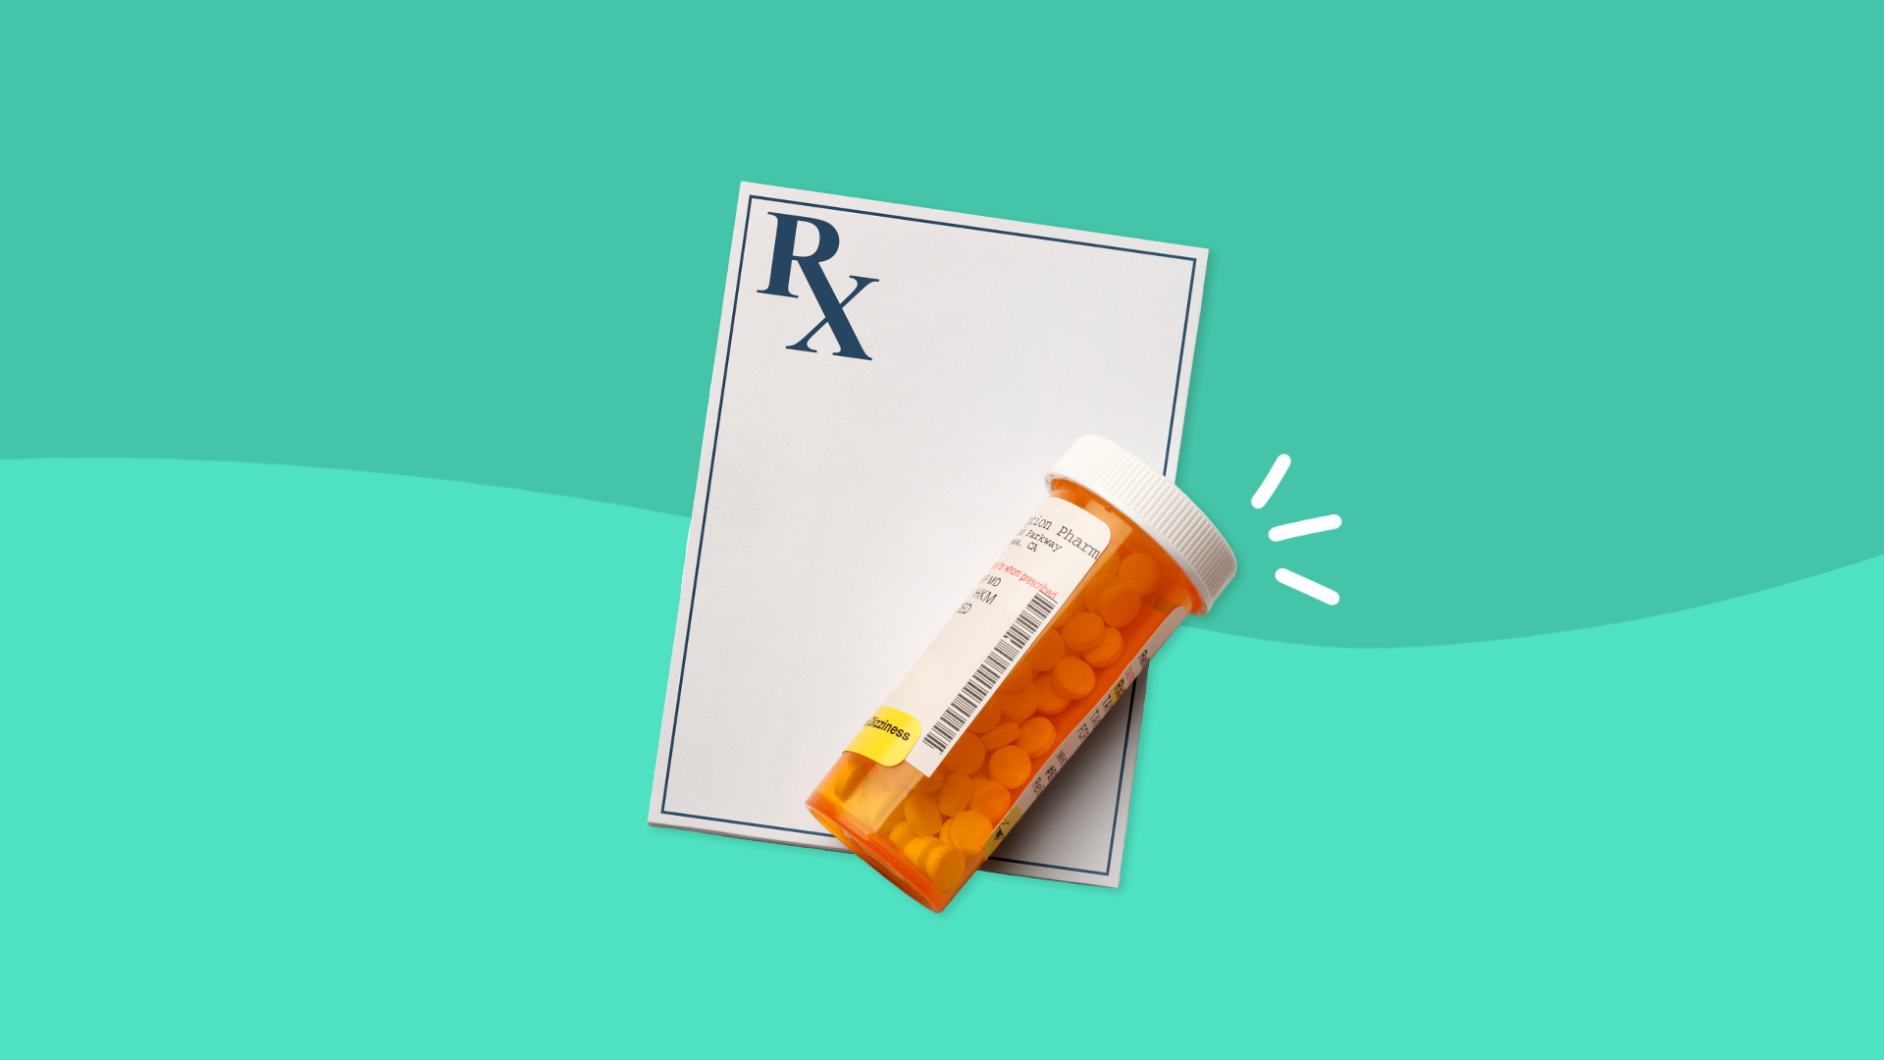 Rx pad and pill bottle representing side effects of Tamiflu